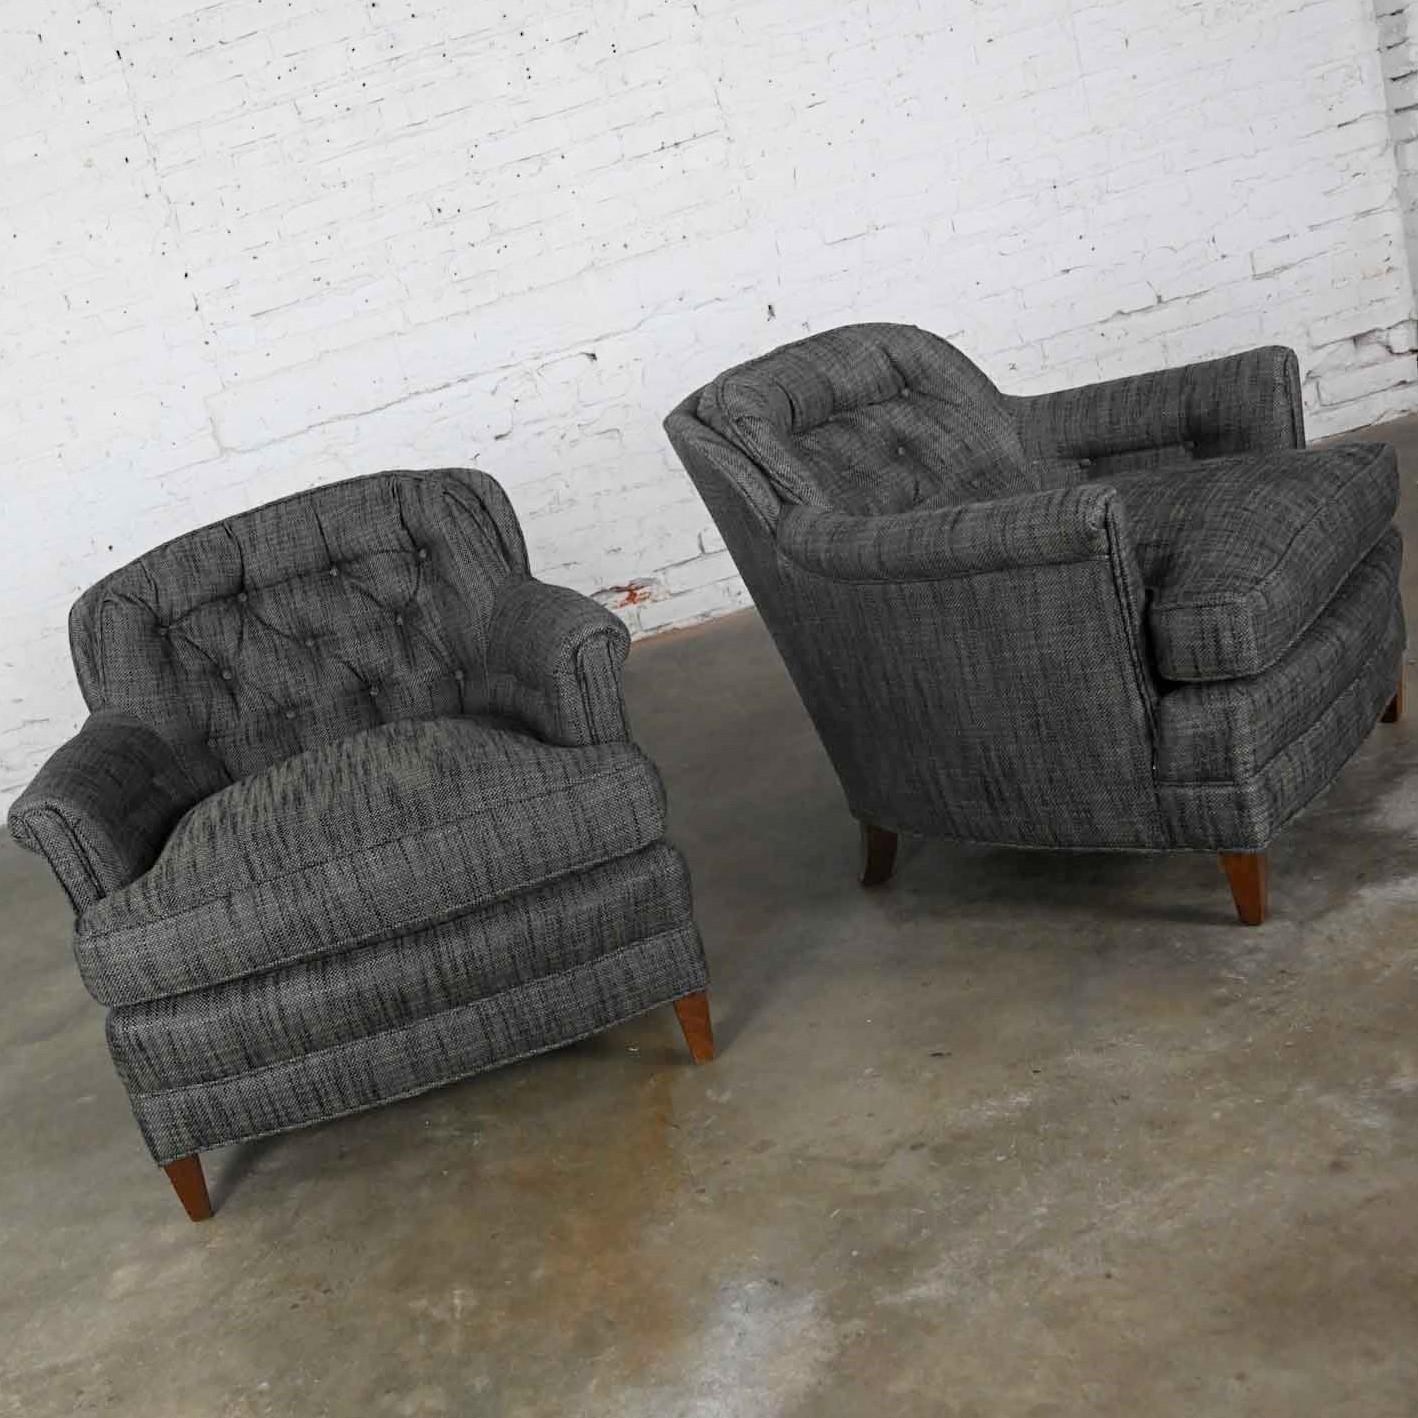 Handsome pair of vintage Henredon club chairs or lounge chairs upholstered in Escapade fabric by Fabricut in their Carbon colorway, which is a charcoal gray tweed, with button back detail. Fabulous condition, keeping in mind that these are vintage